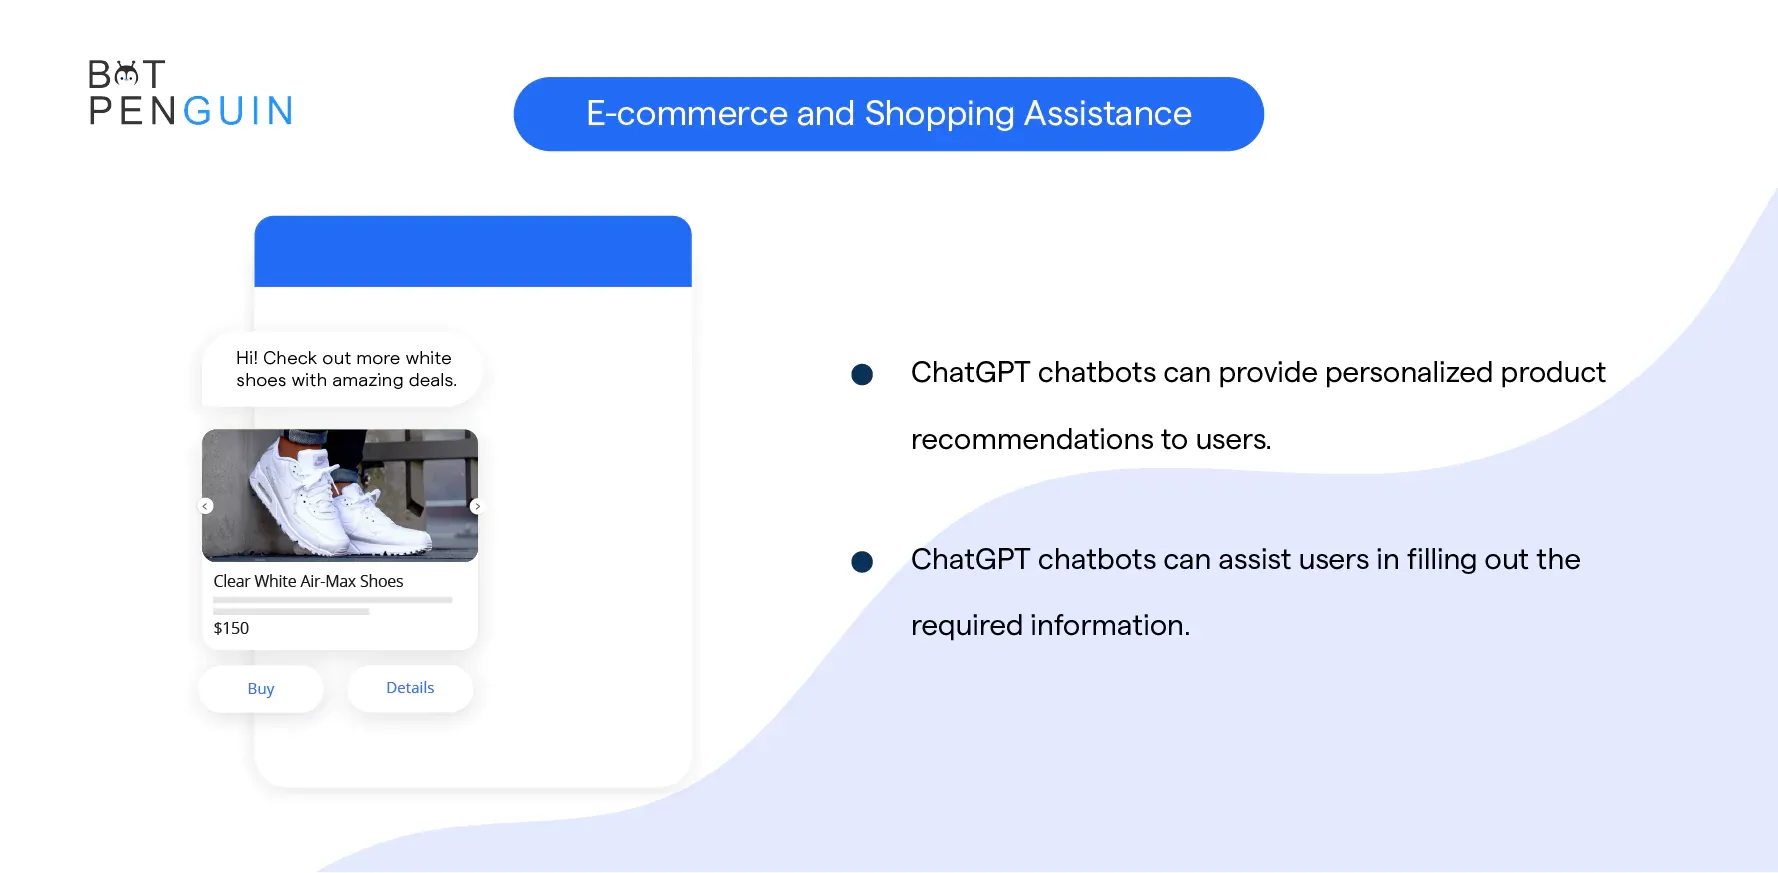 E-commerce and Shopping Assistance.